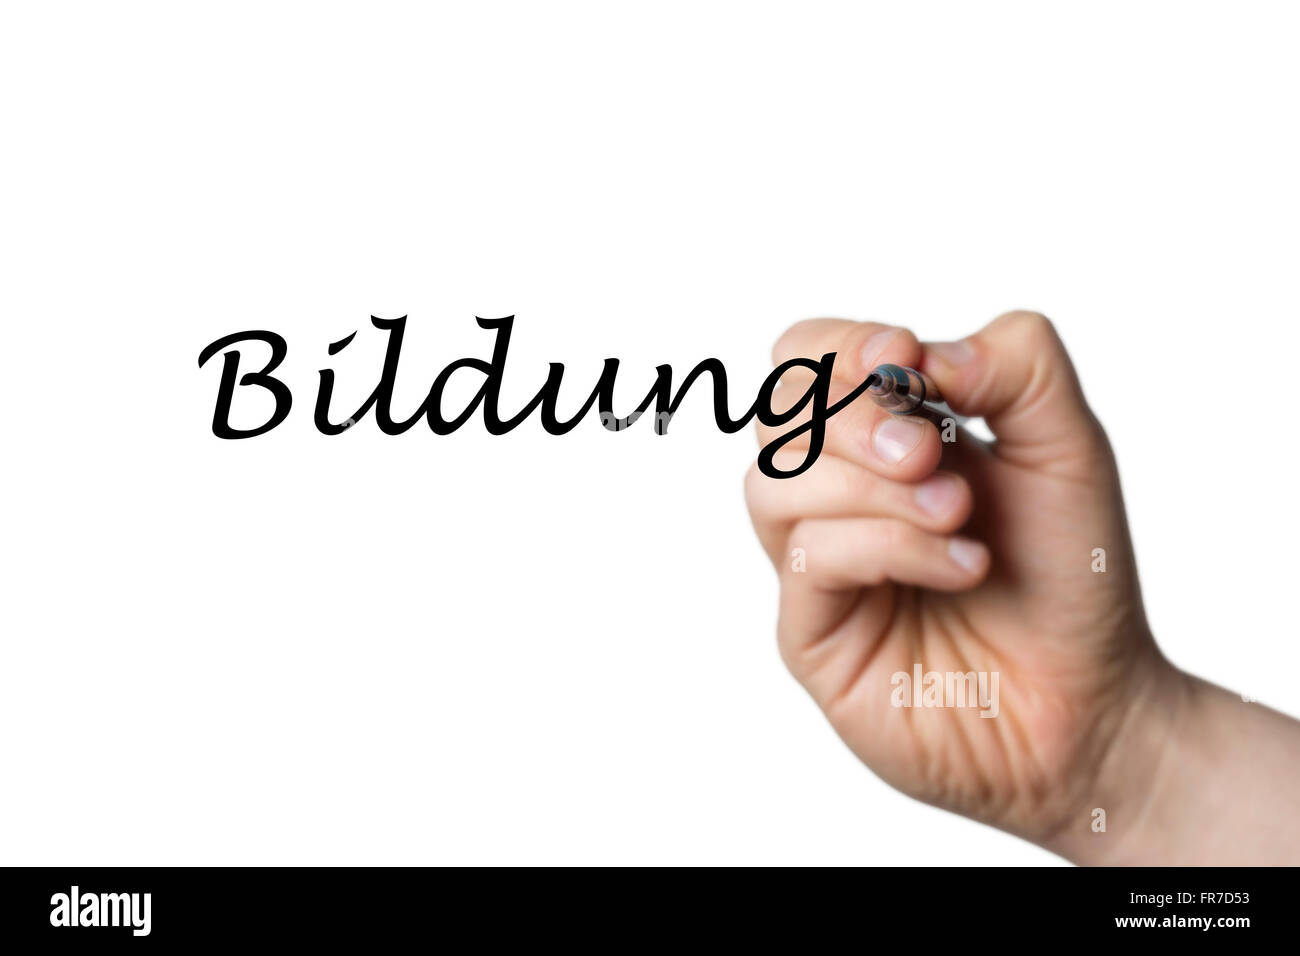 Bildung (german Education) written by a hand isolated on white background Stock Photo